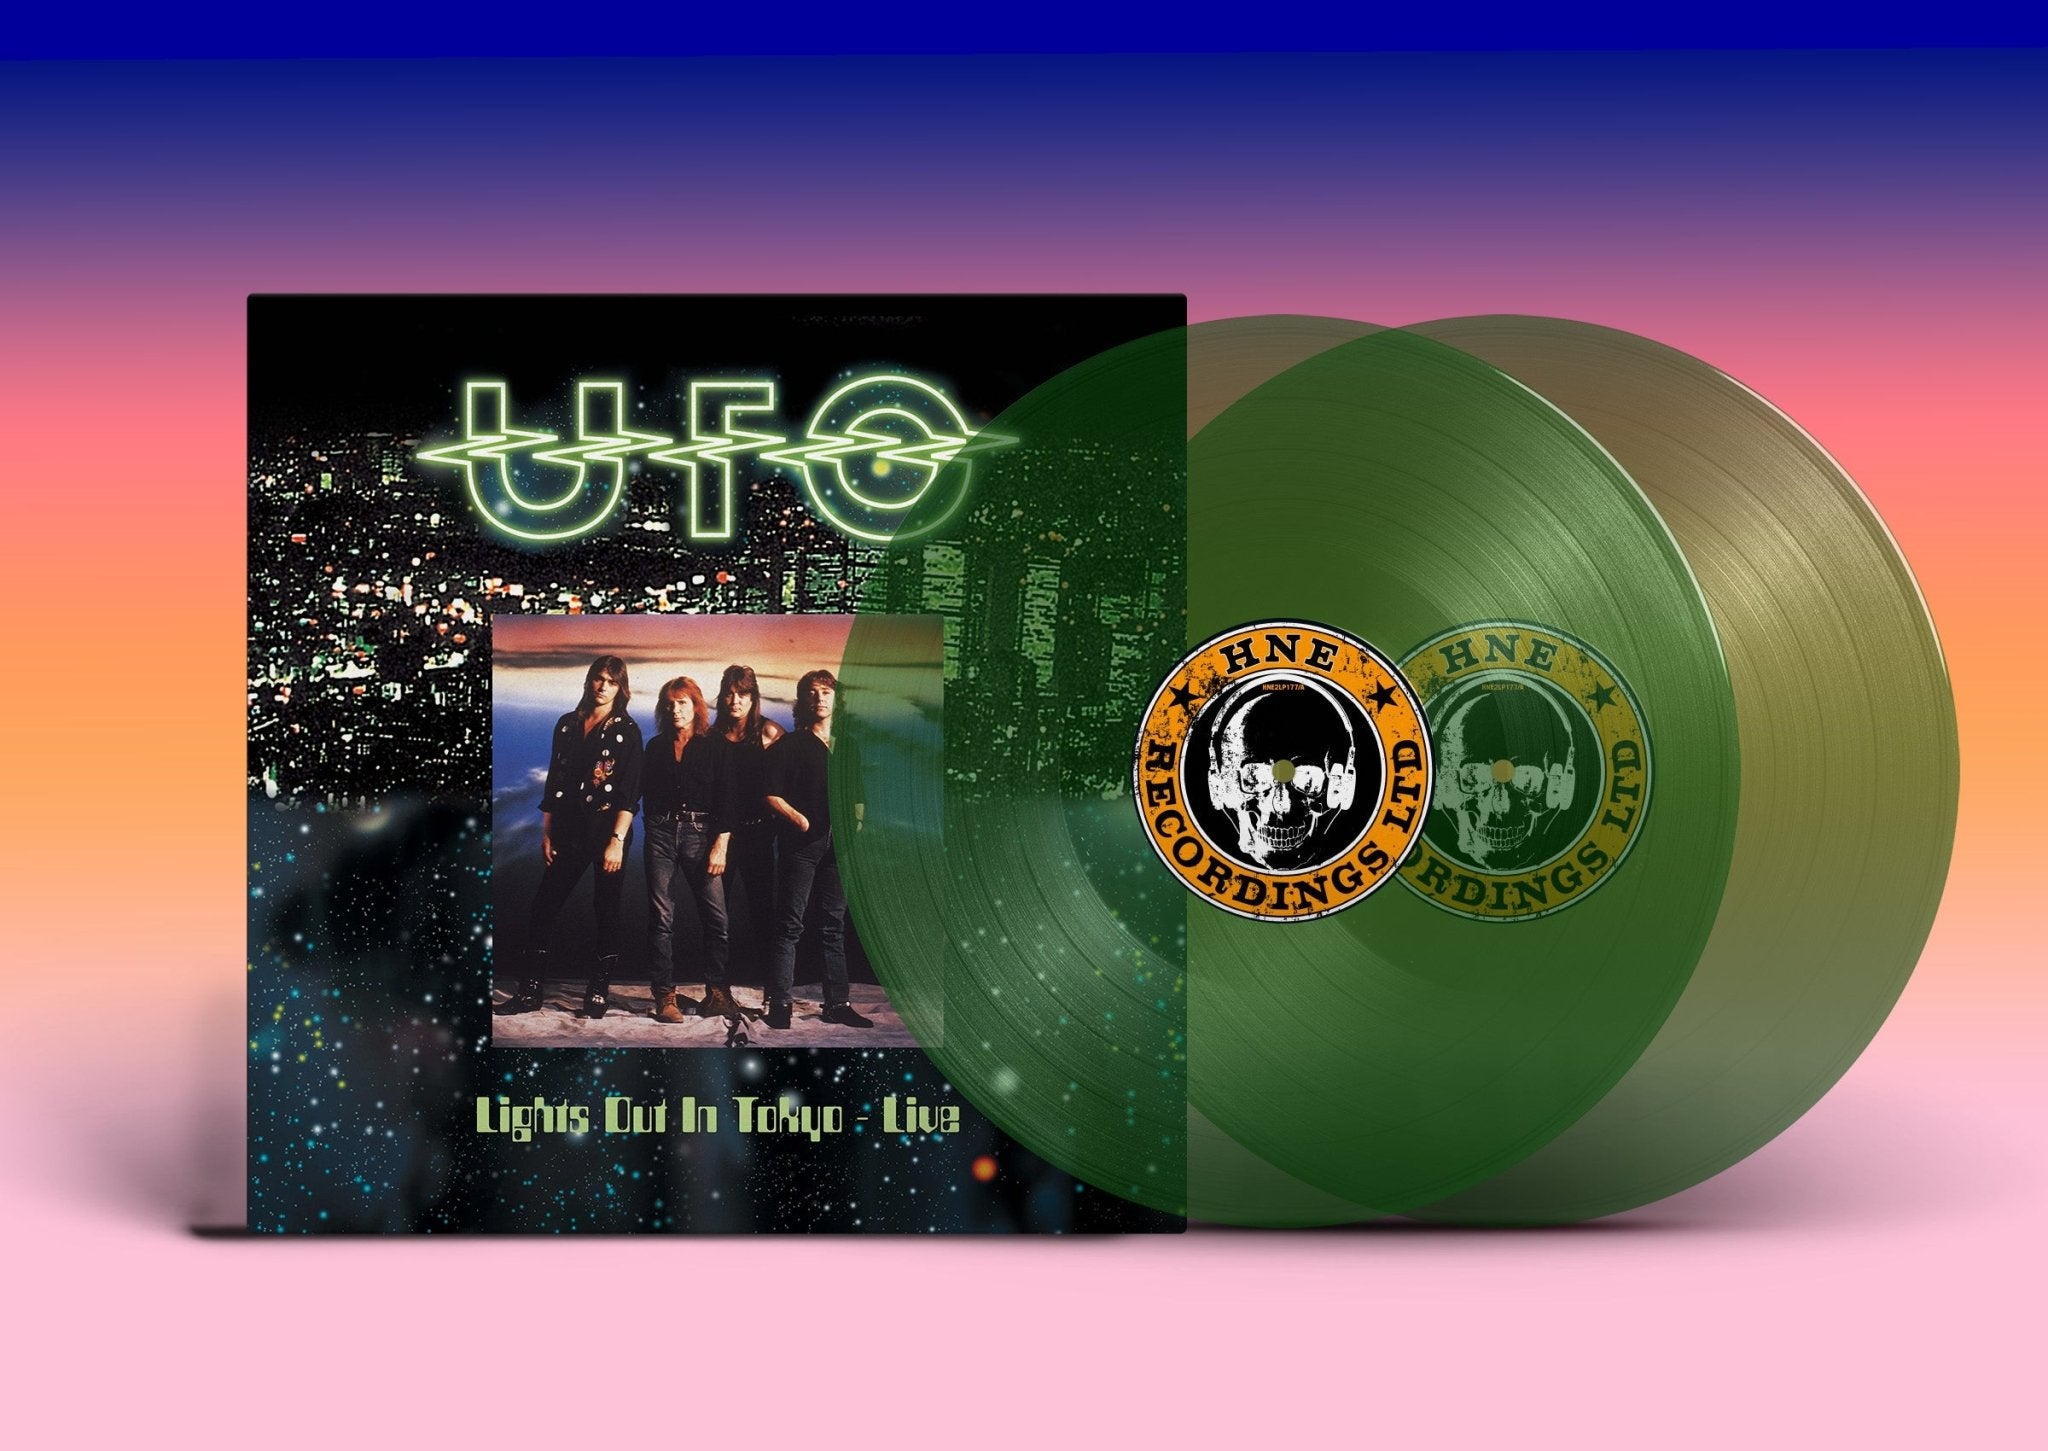 Ufo - Lights Out In Tokyo Live - 33RPM